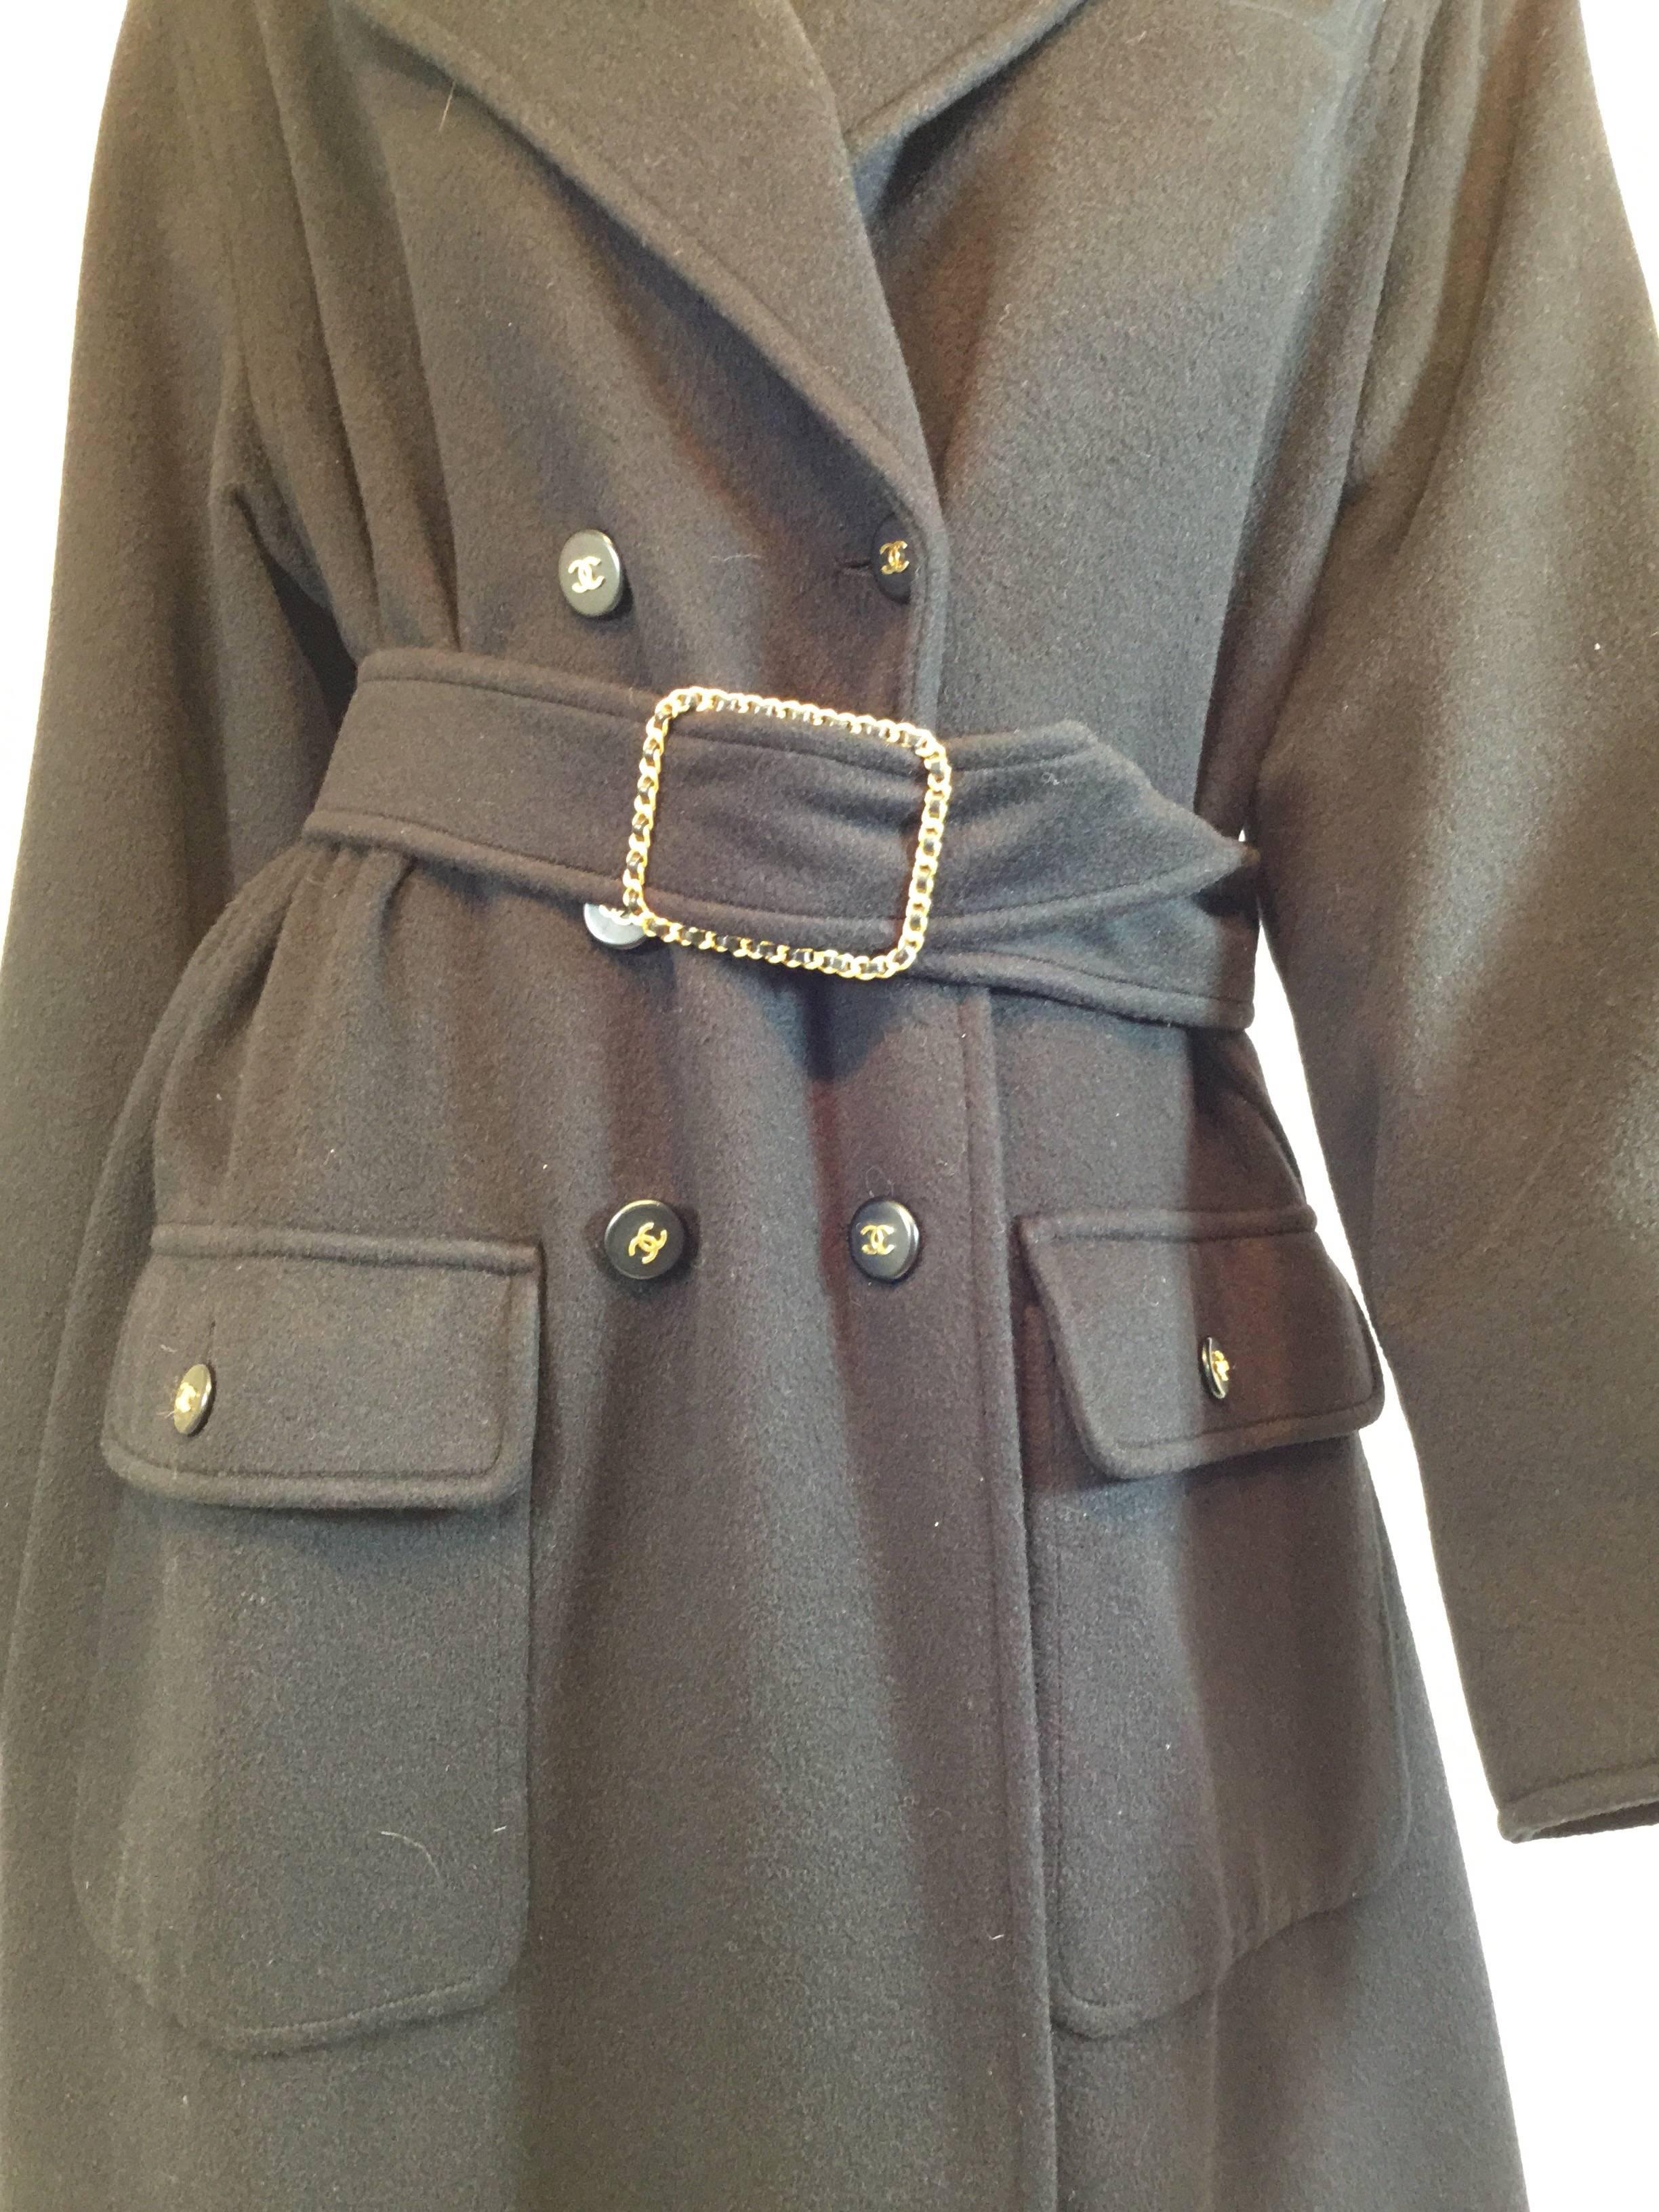 Chanel cashmere maxi coat estimated to be from 1999-2000 features chain around belt buckle with gold hardware and 6 black logo buttons down the front with gold CC centers. This is a winter coat, the cashmere is thick and is lined in silk. There are